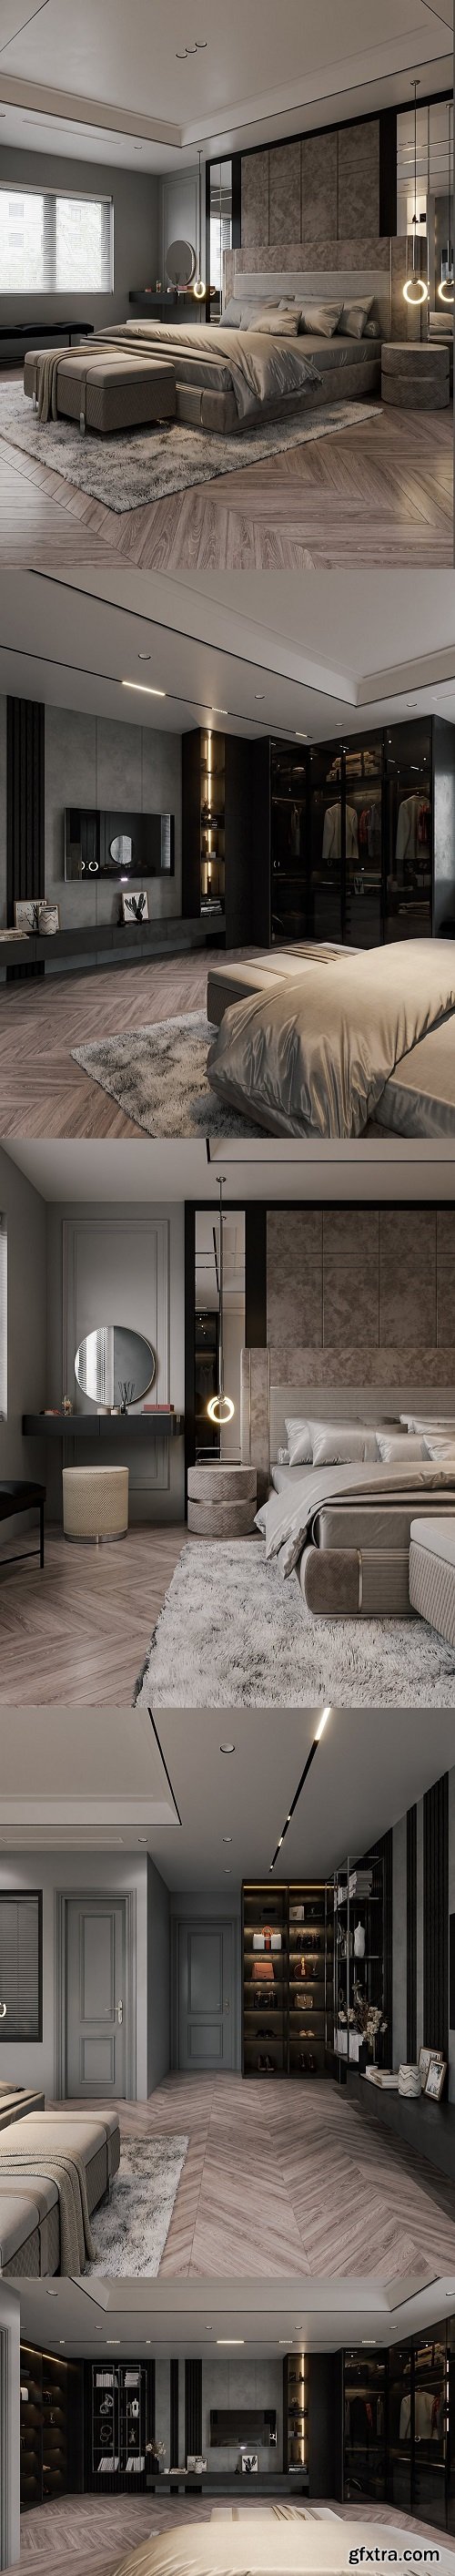 Master Bedroom Interior by An